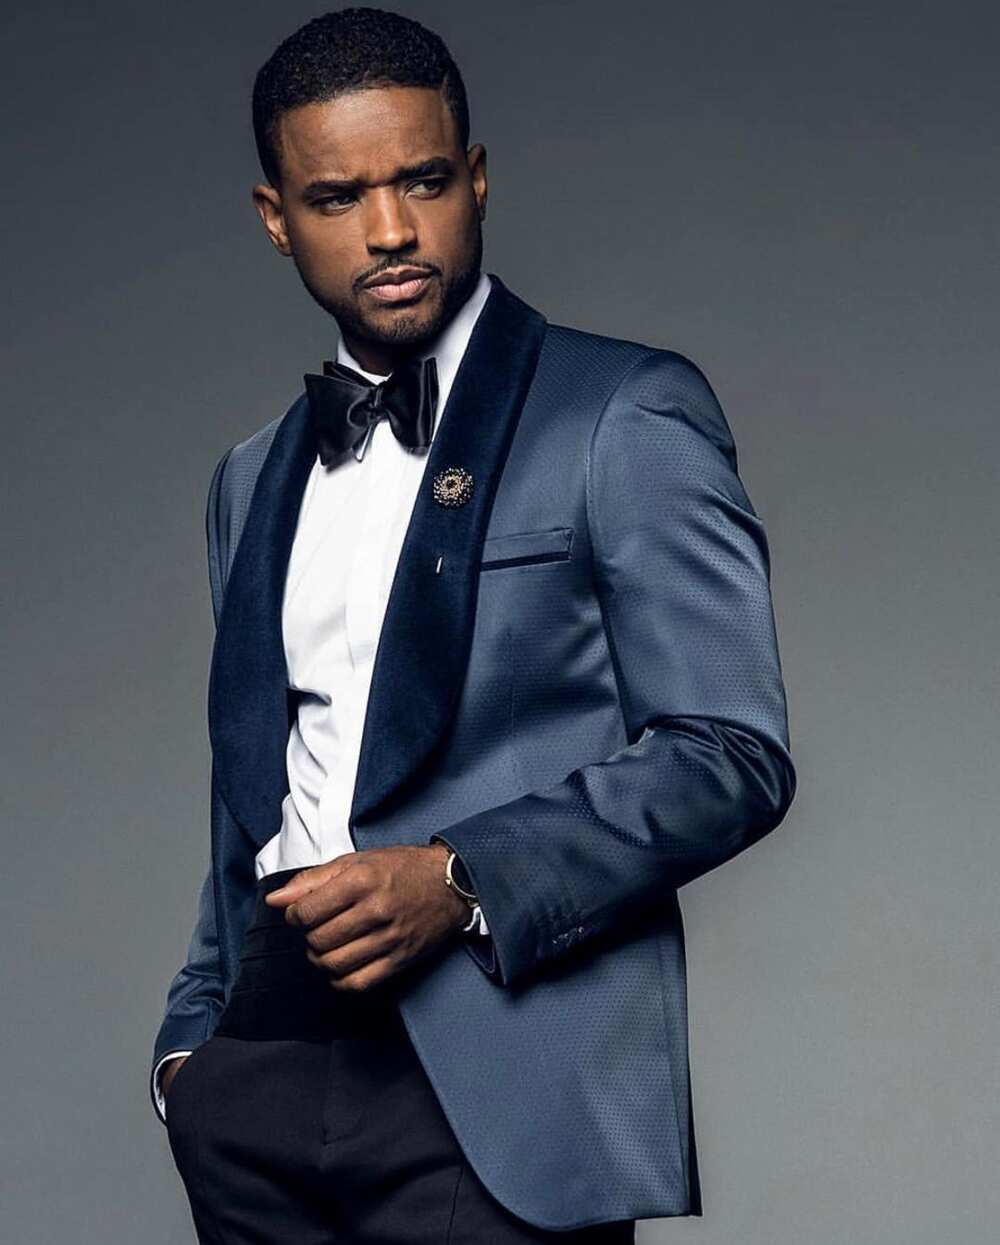 Actor Larenz Tate bio: age, height, net worth, brothers, wife - Legit.ng